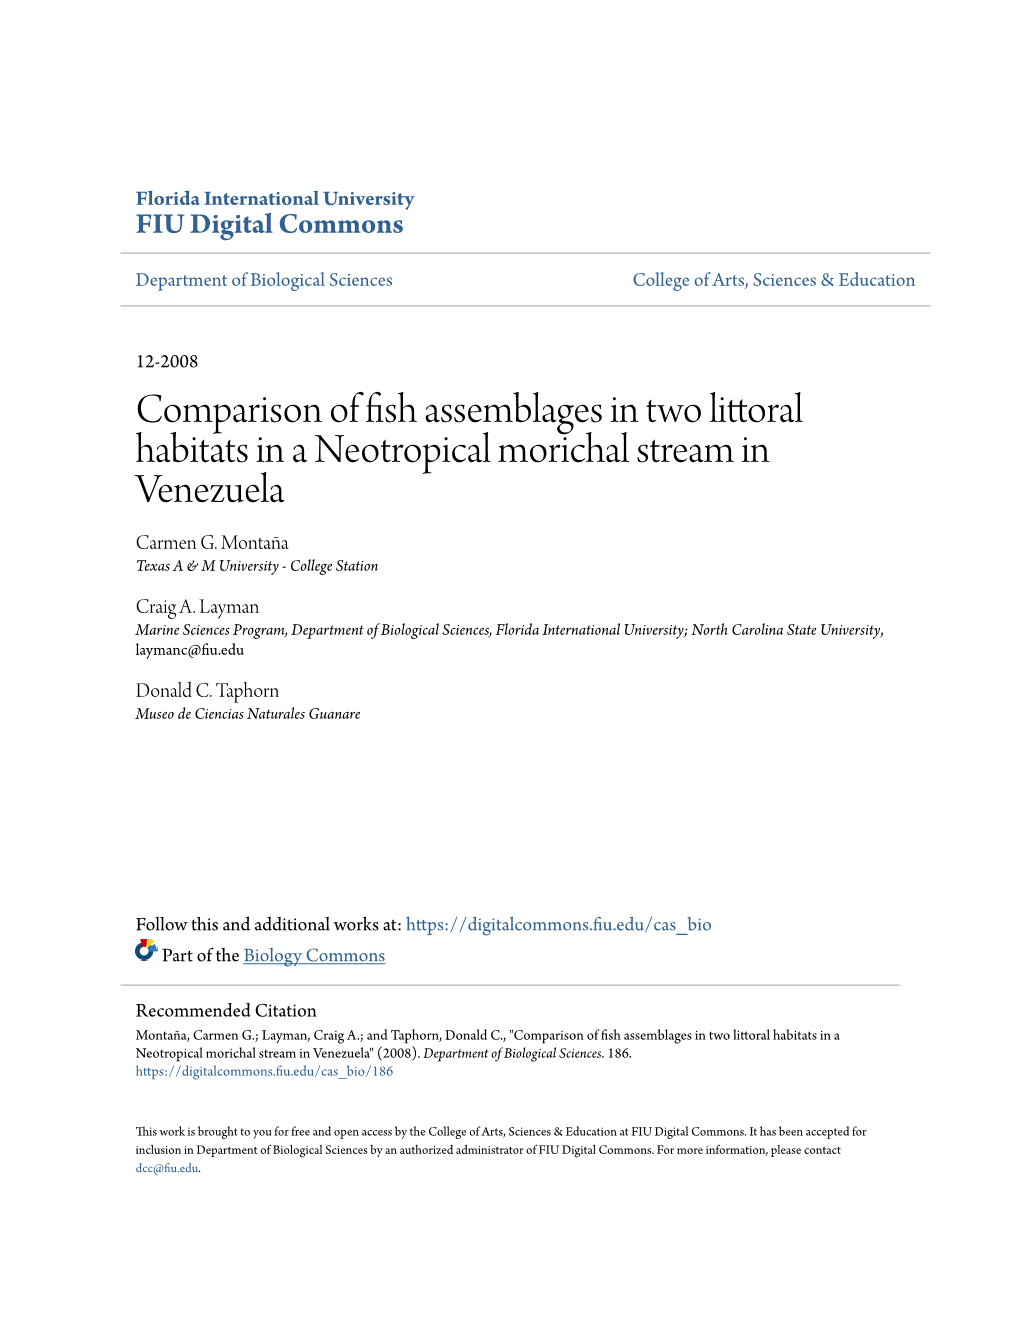 Comparison of Fish Assemblages in Two Littoral Habitats in a Neotropical Morichal Stream in Venezuela Carmen G